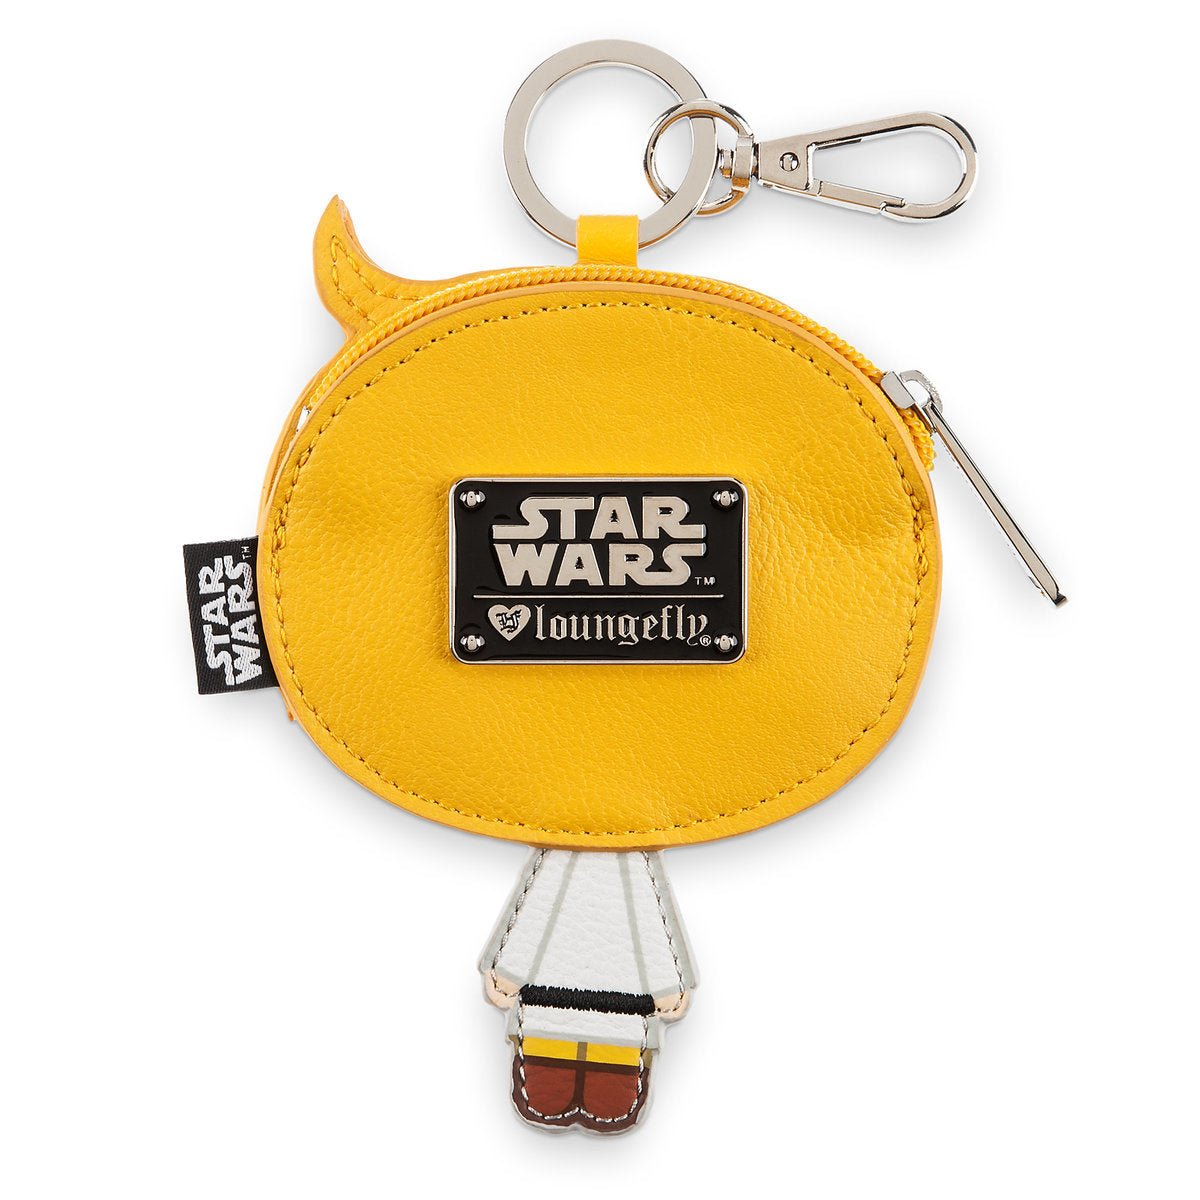 Disney Star Wars Luke Skywalker Coin Purse by Loungefly New with Tags